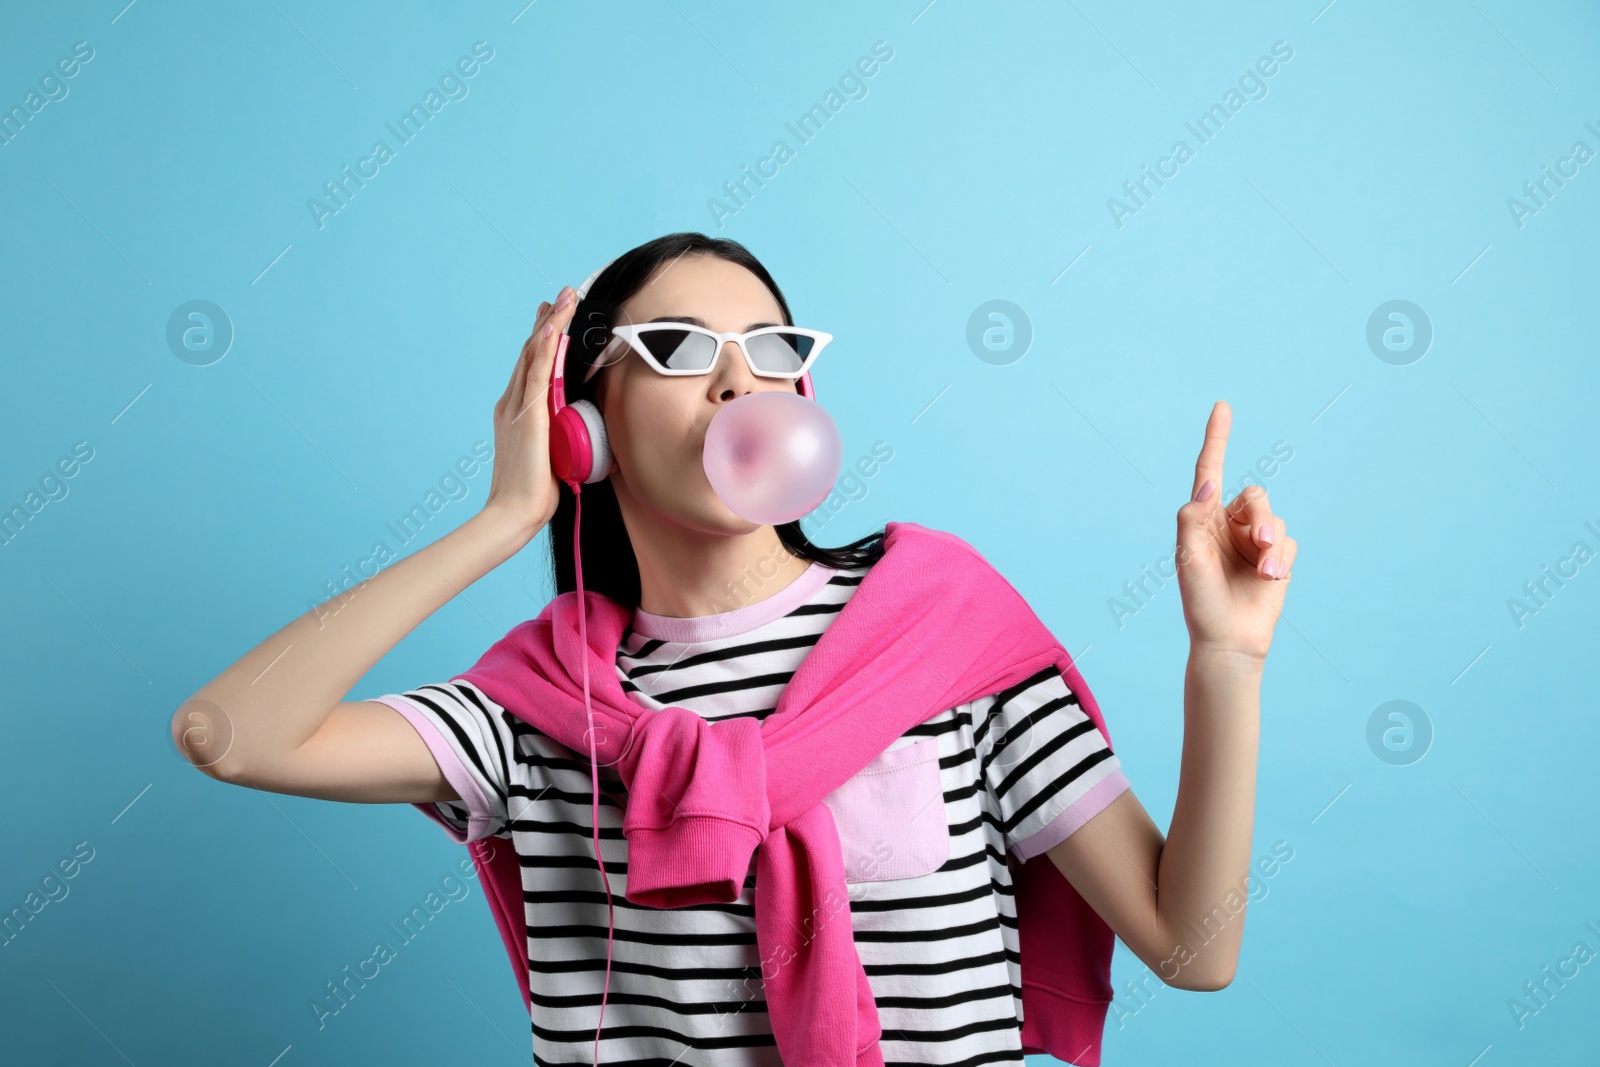 Photo of Fashionable young woman with headphones blowing bubblegum on light blue background